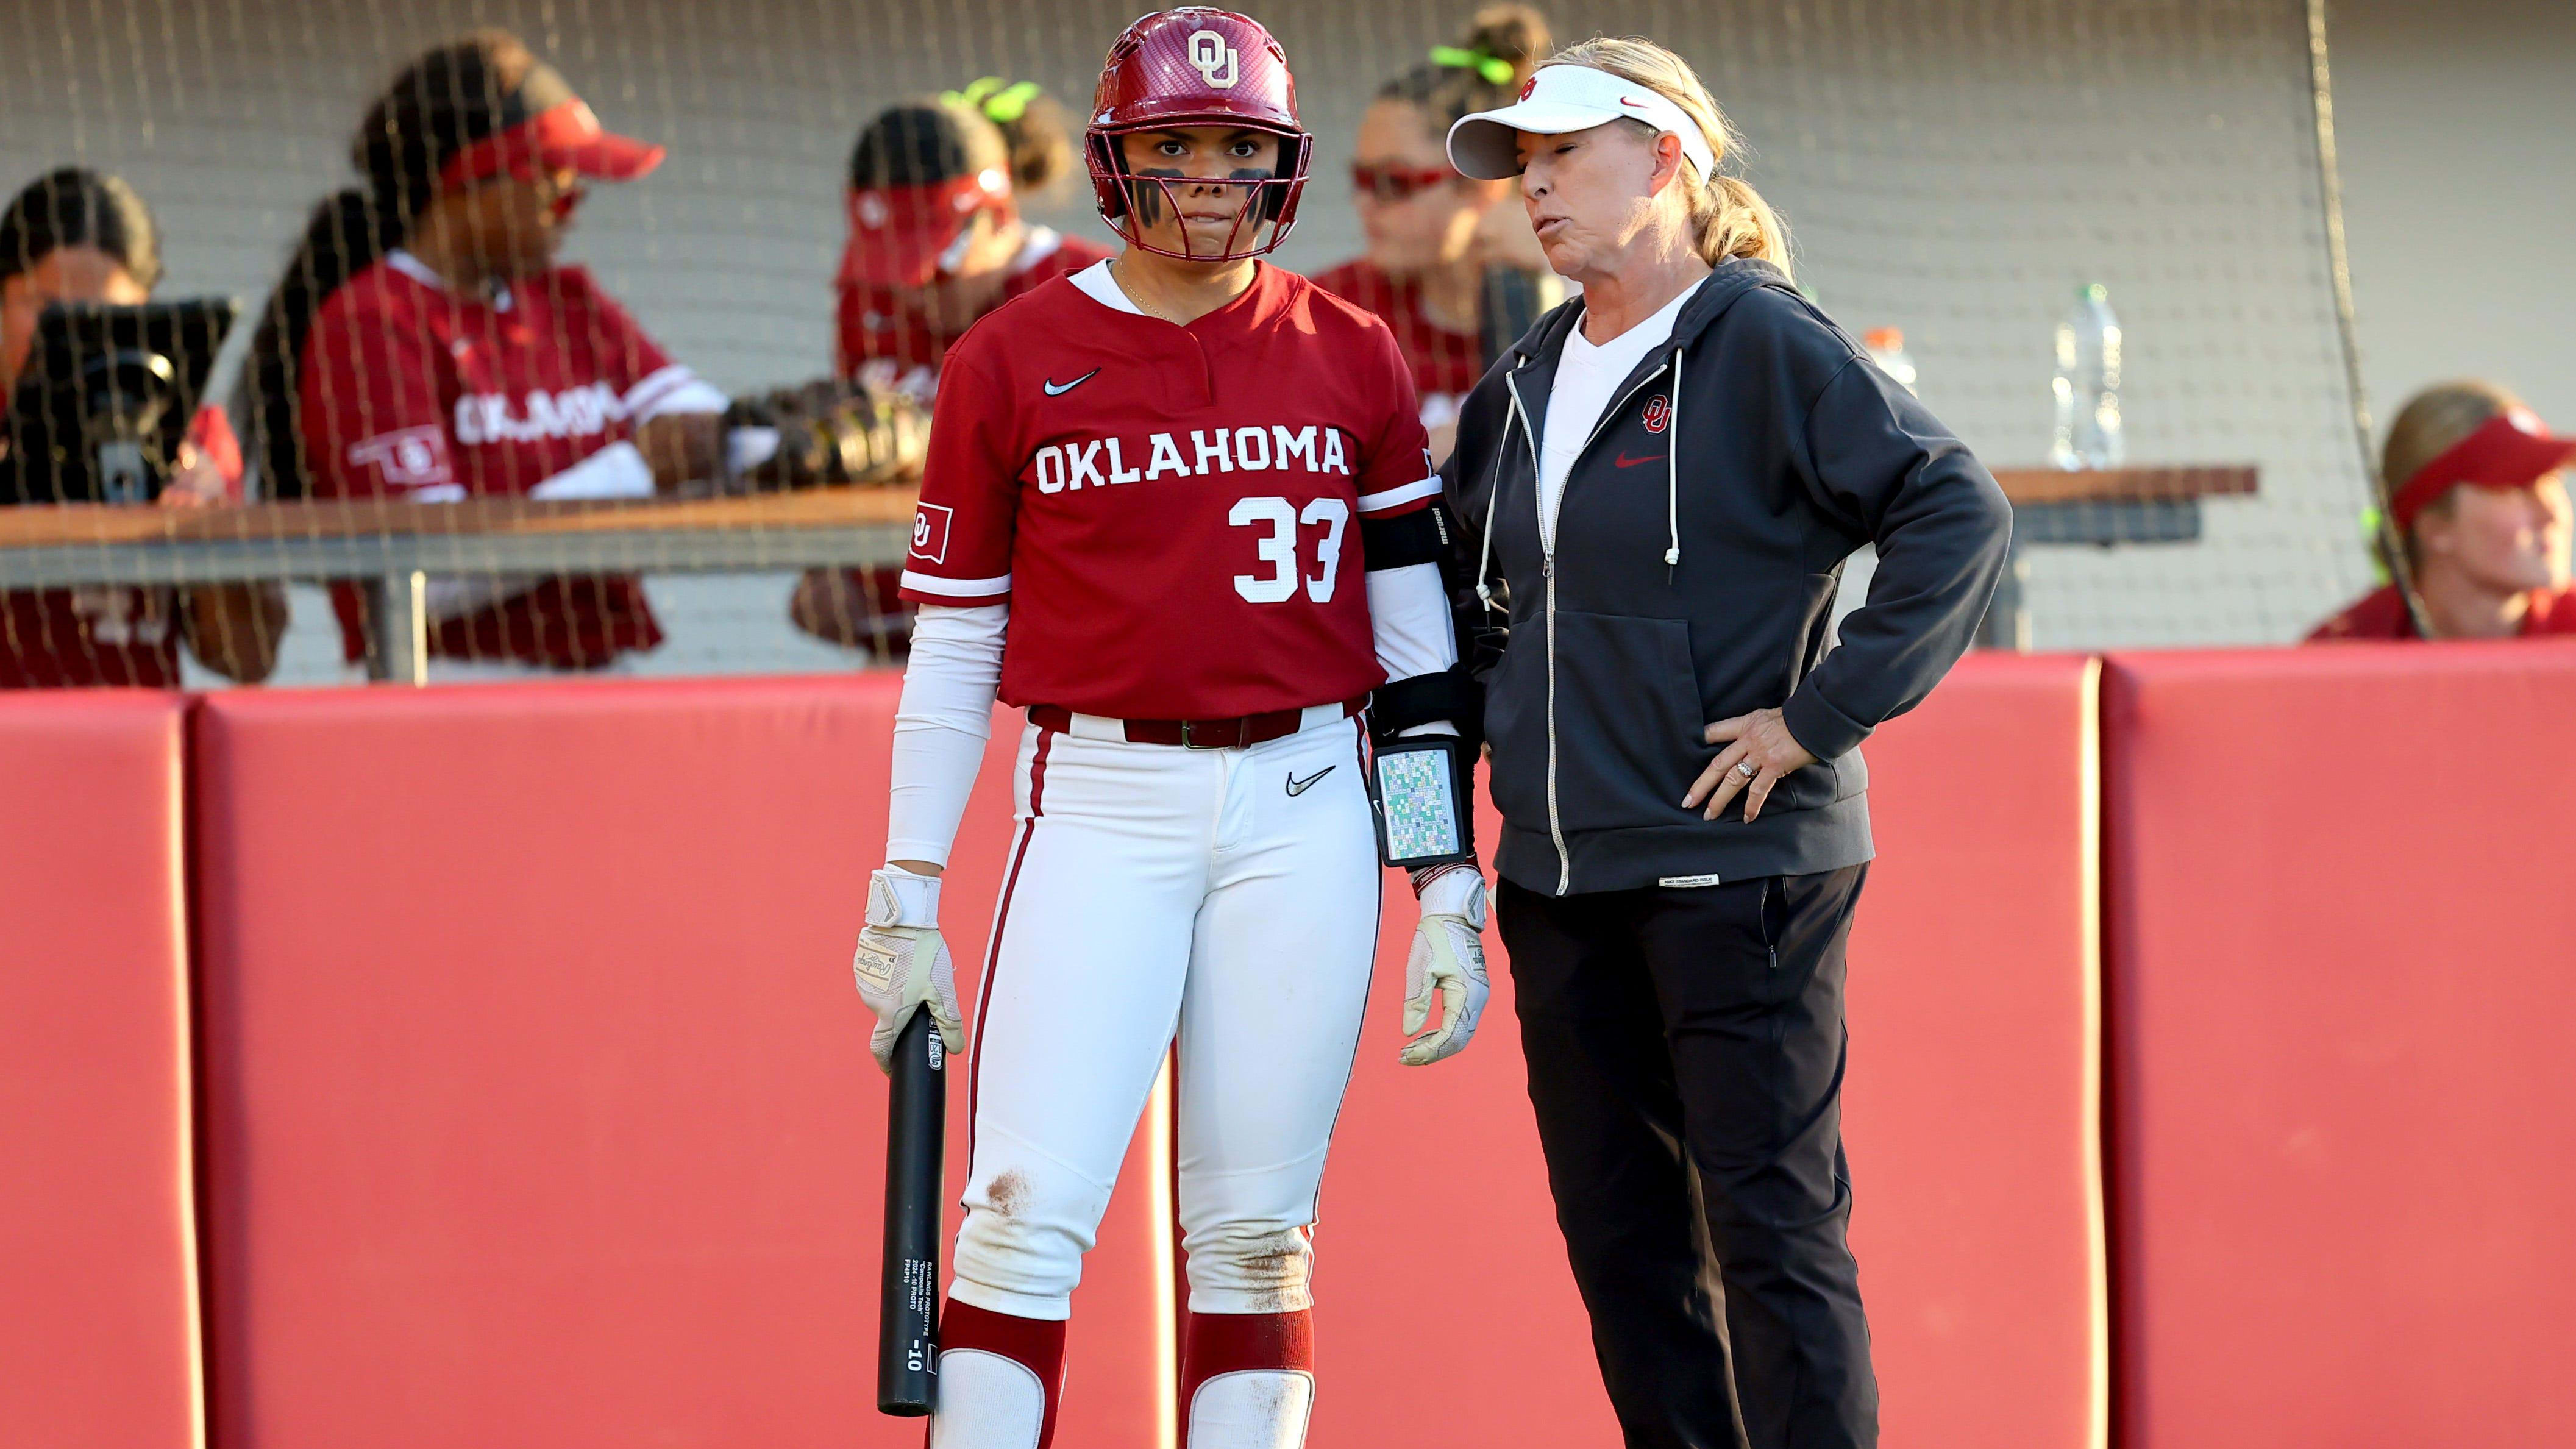 OU Softball: Oklahoma Shocked by BYU, in Danger of Dropping Second Consecutive Series